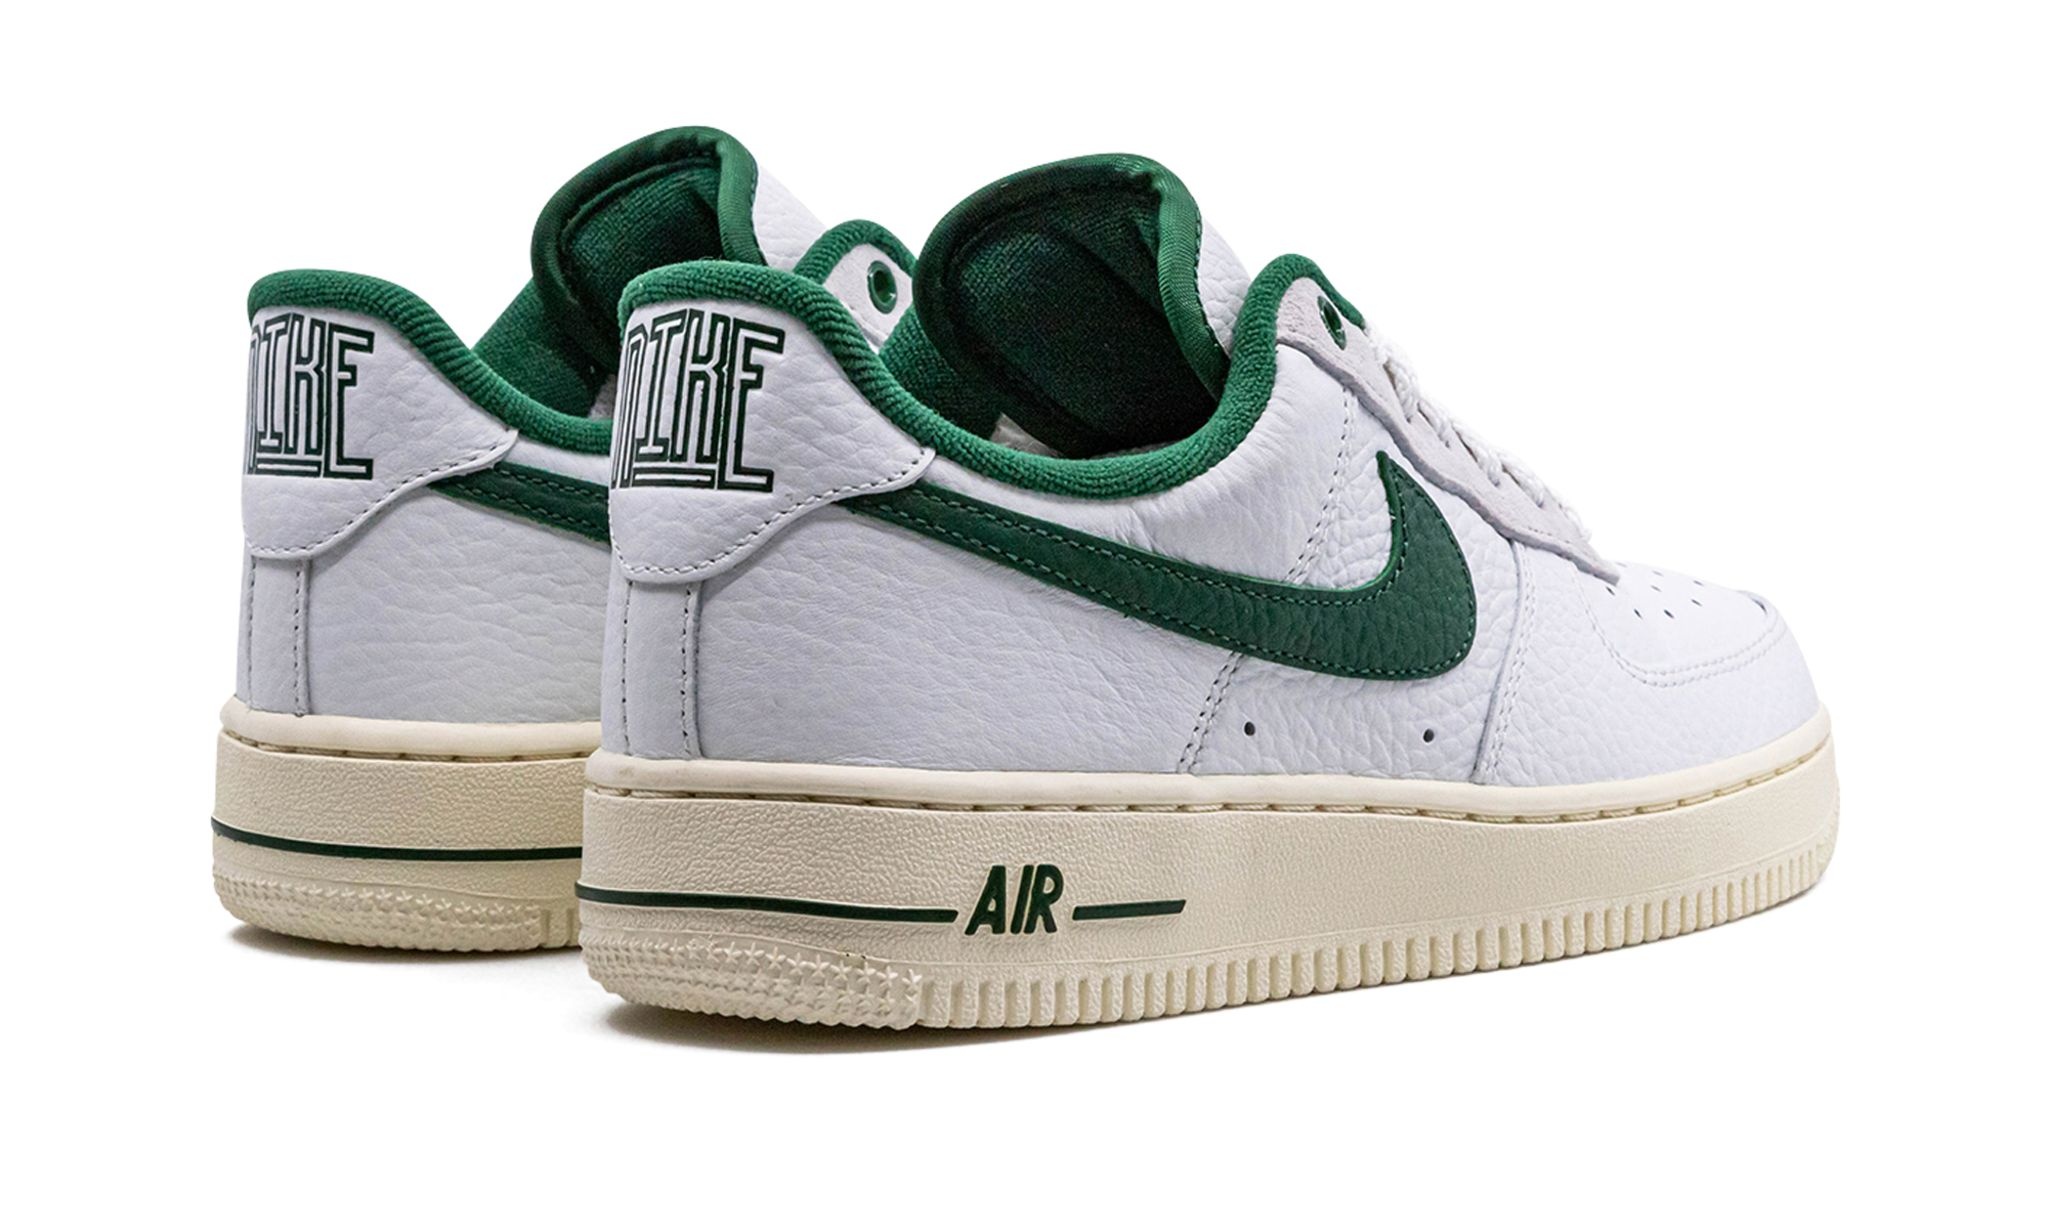 Nike Air Force 1 Low '07 LX WMNS "Command Force Gorge Green" - 3